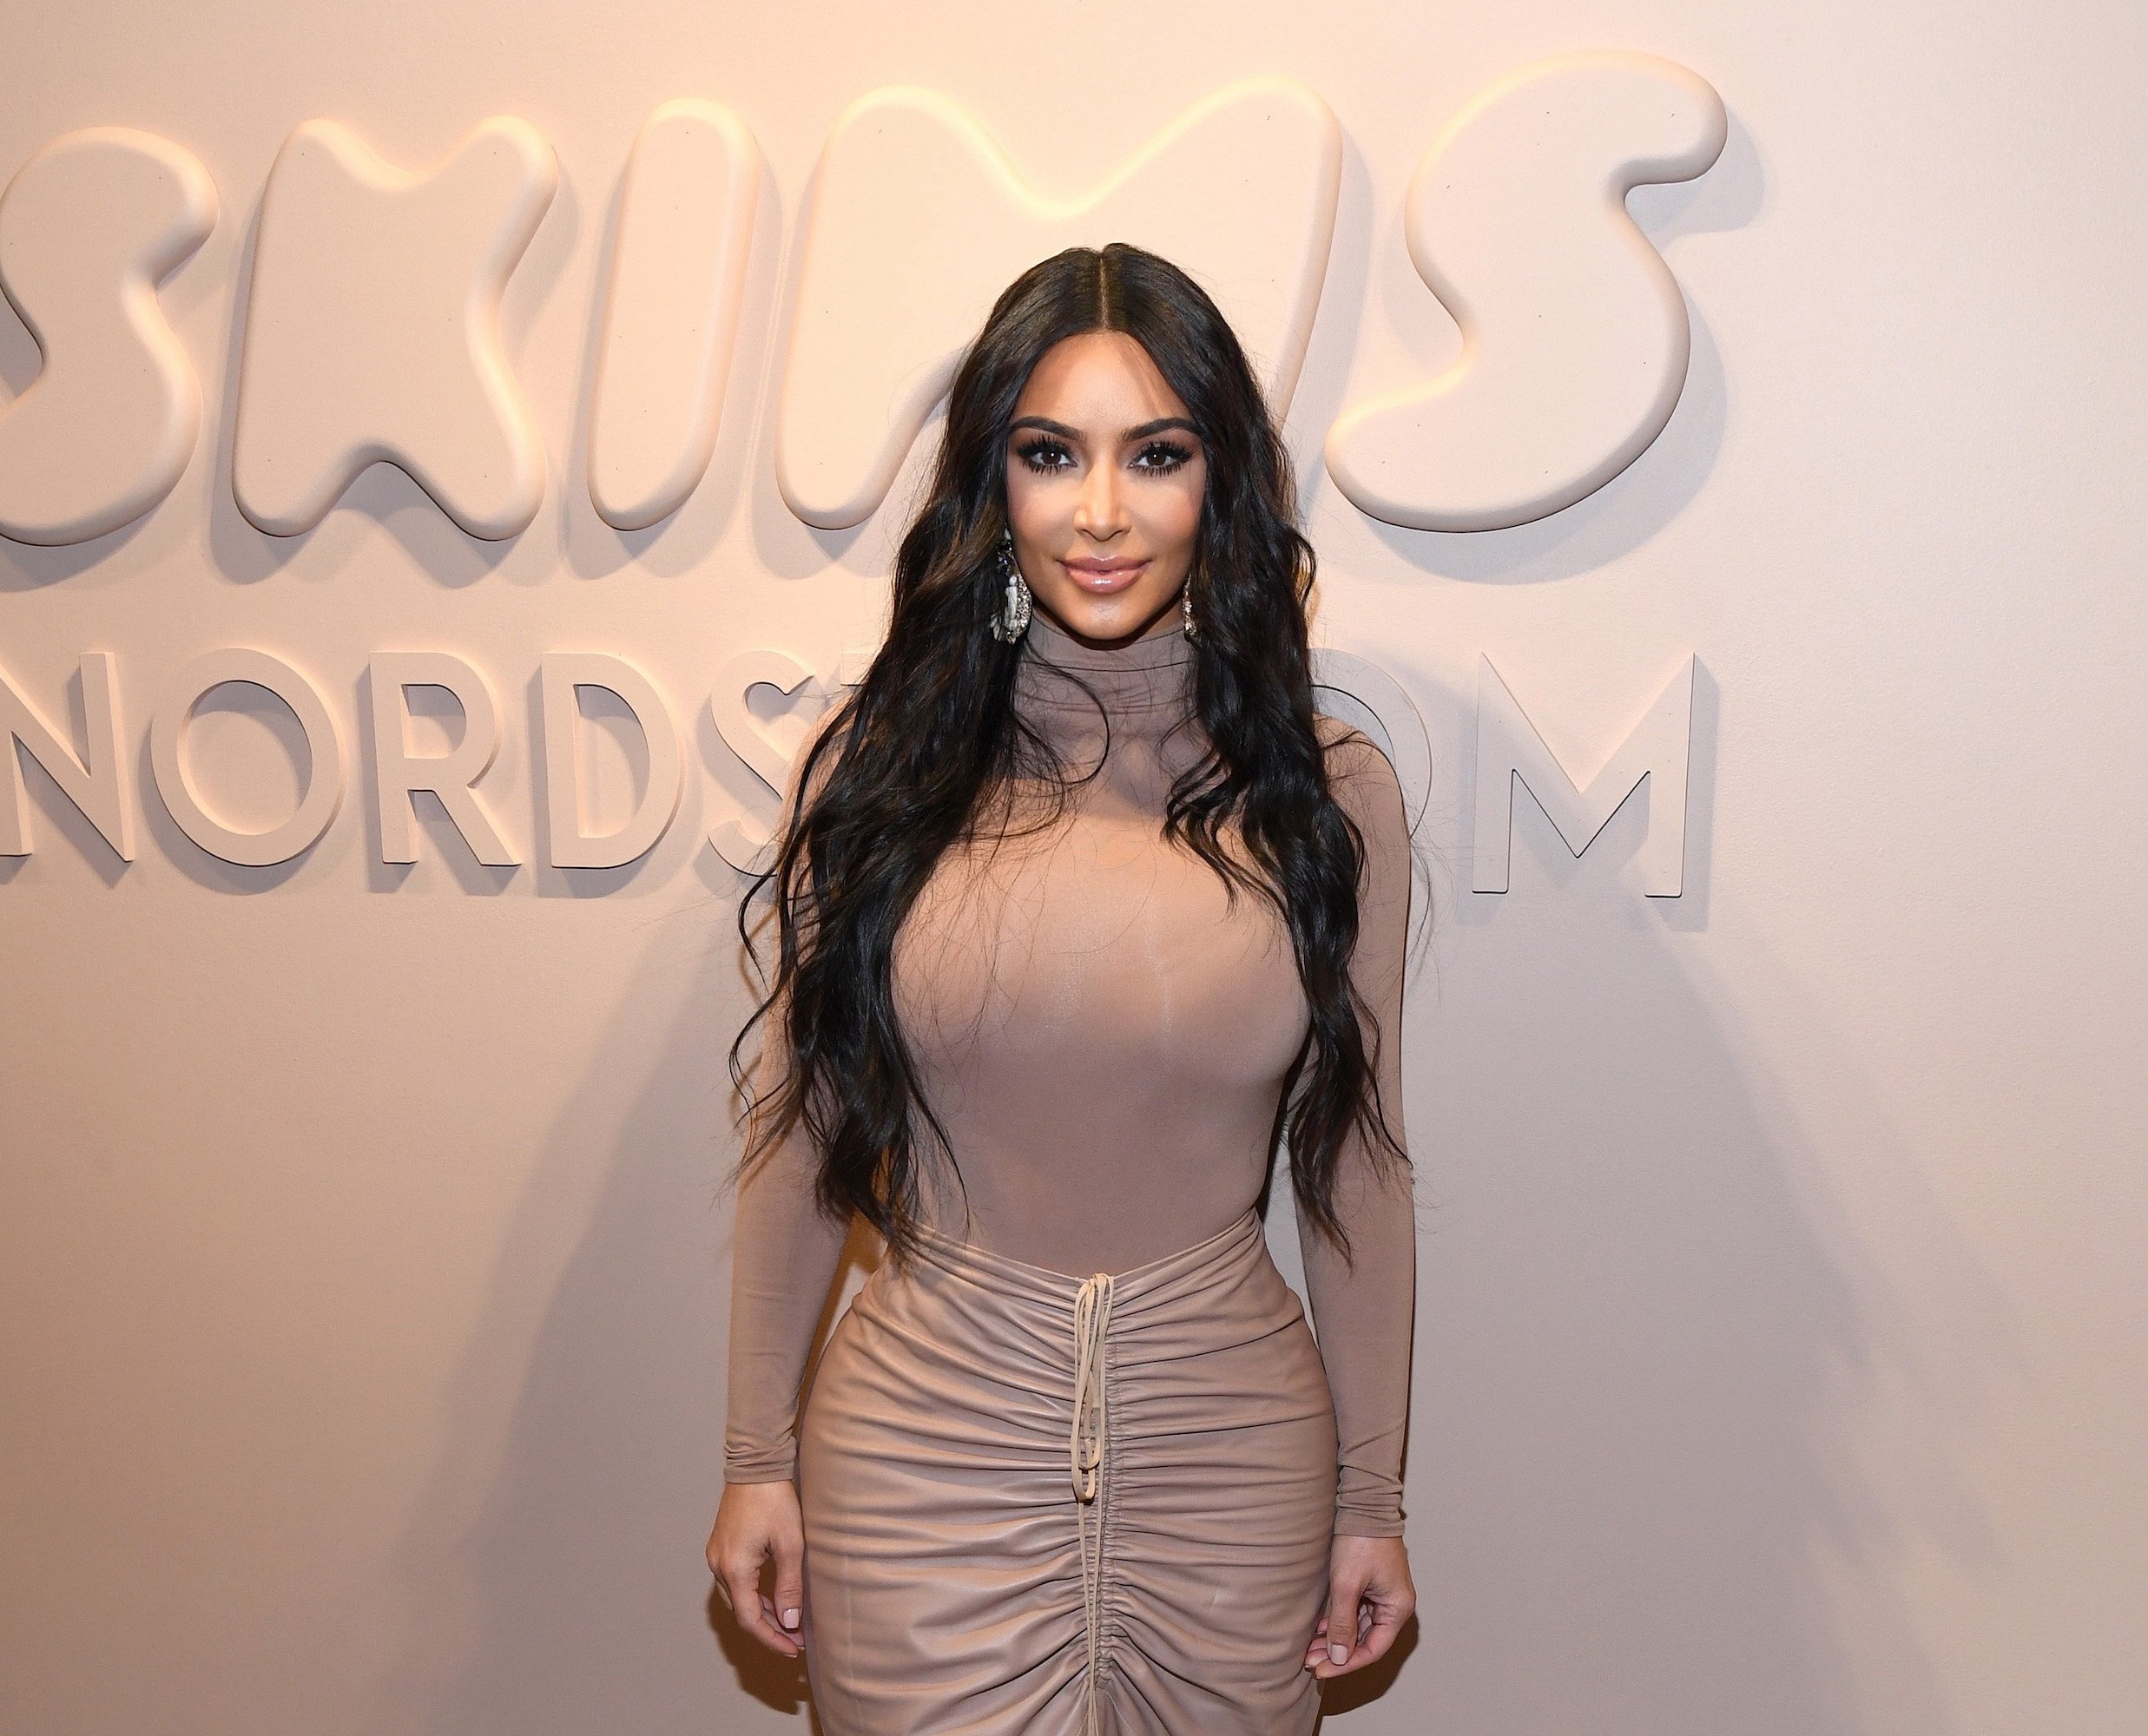 Kim Kardashian West celebrating the launch of her shapewear brand, SKIMS, at Nordstrom in 2020